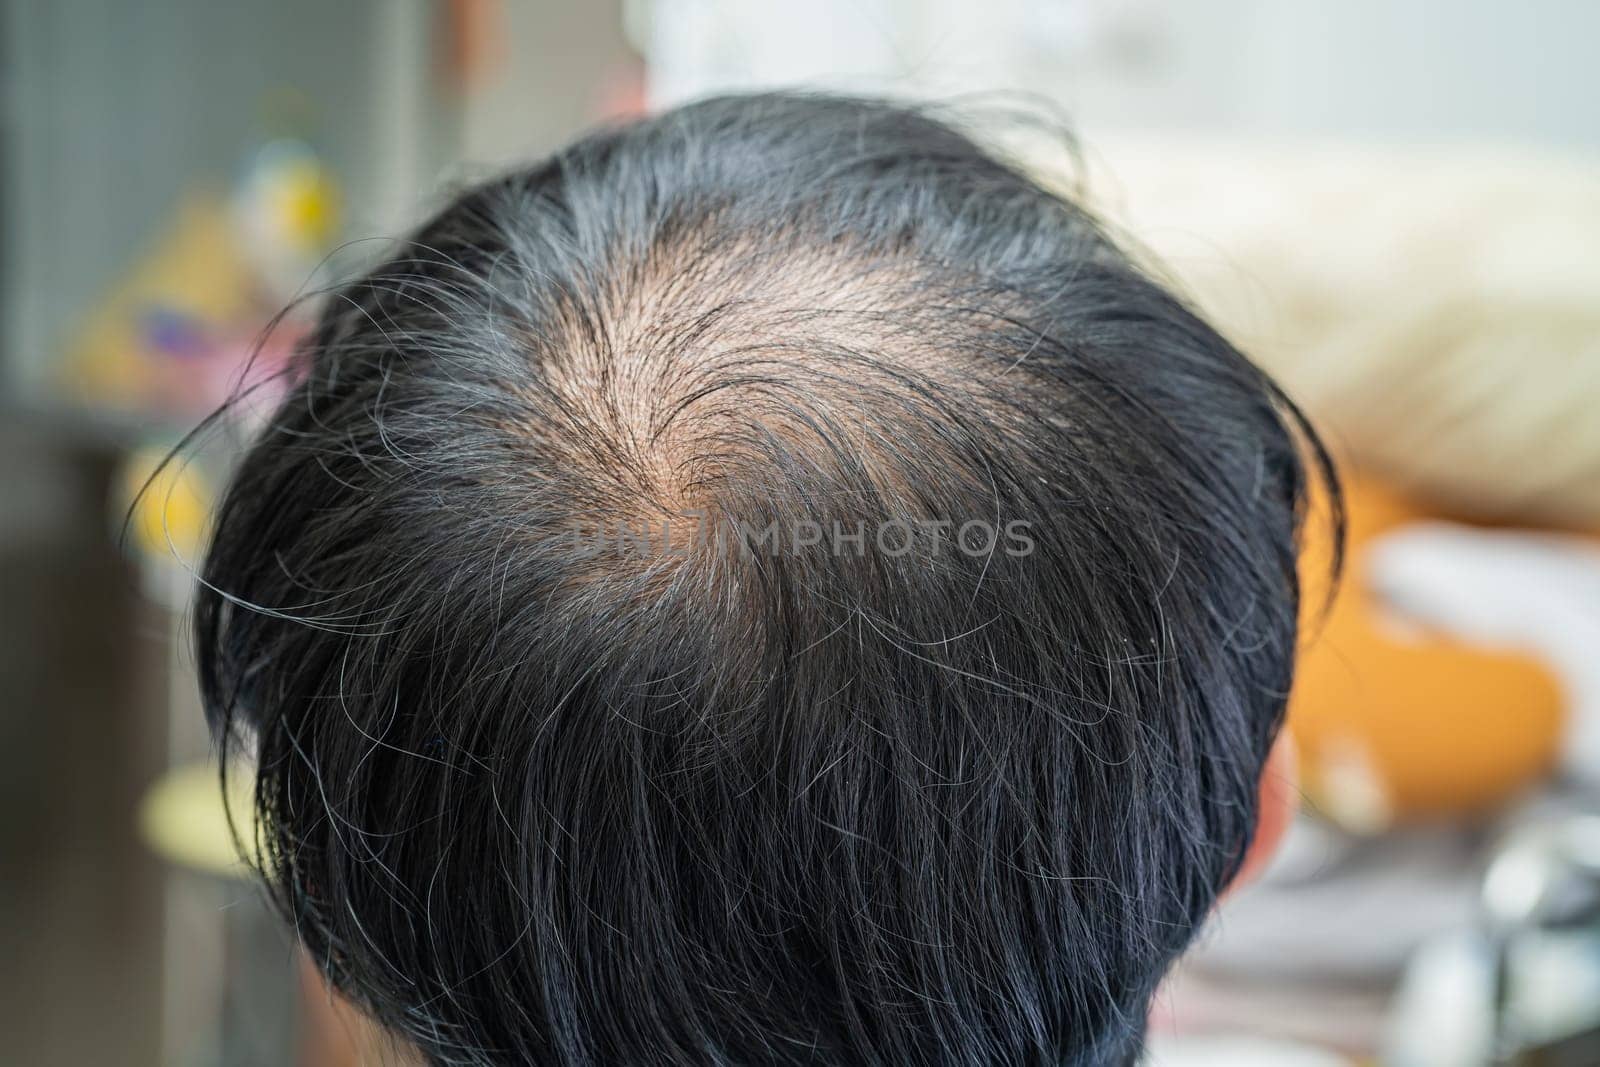 Bald in the middle head and begin no loss hair glabrous of mature Asian business smart active office man. by pamai